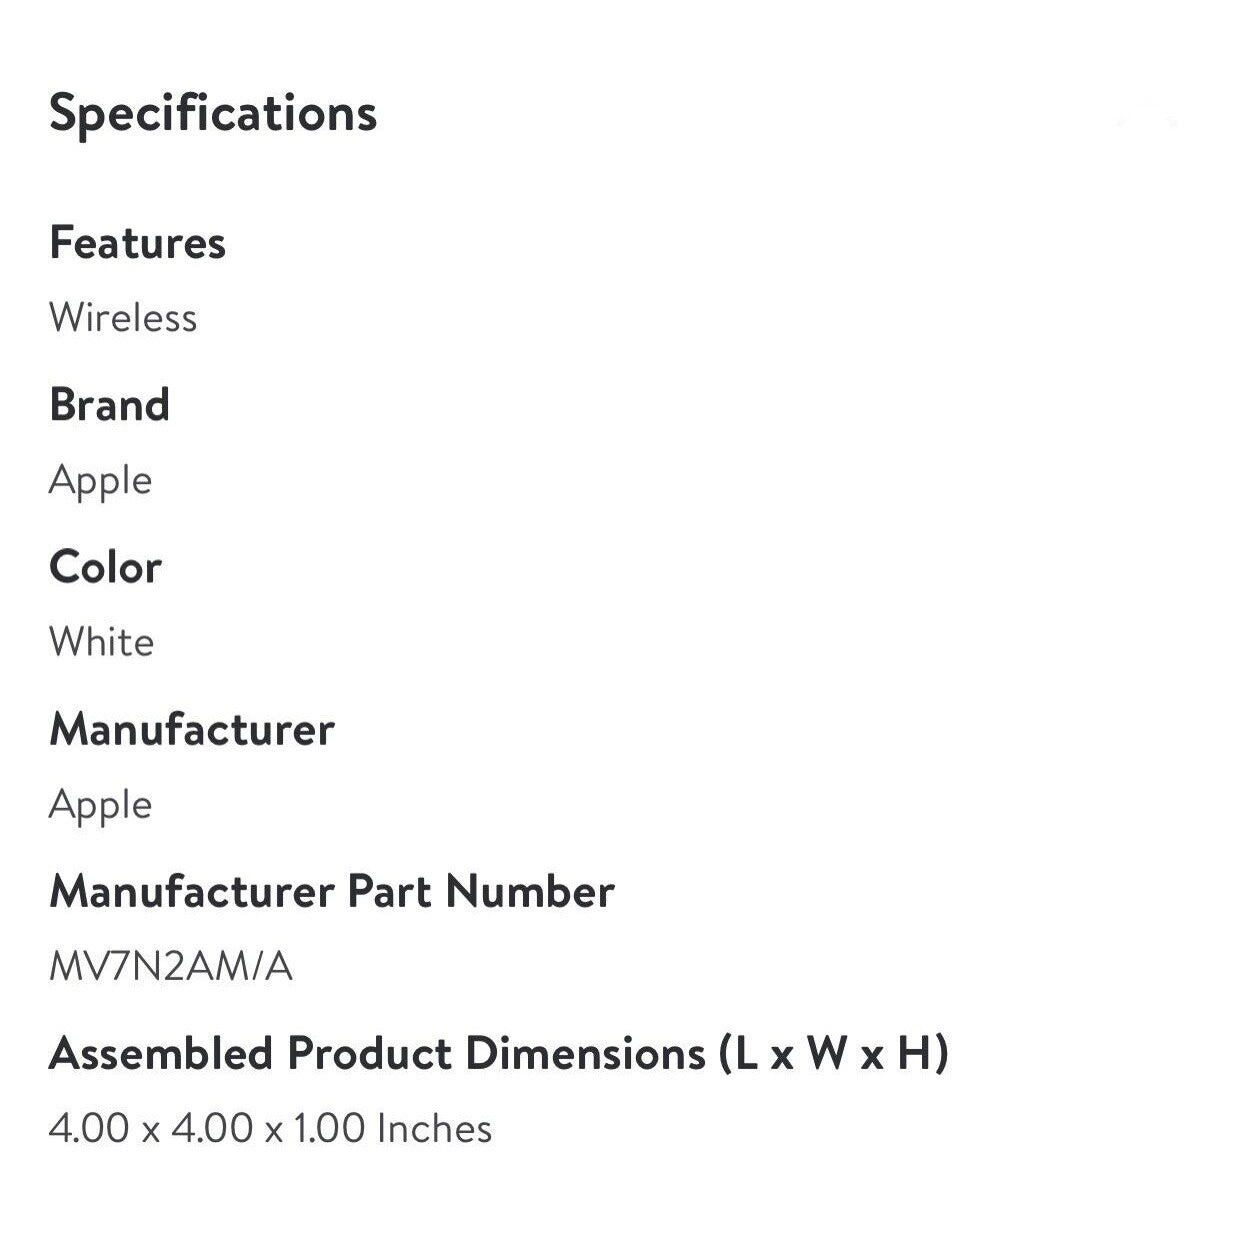 Product Specifications